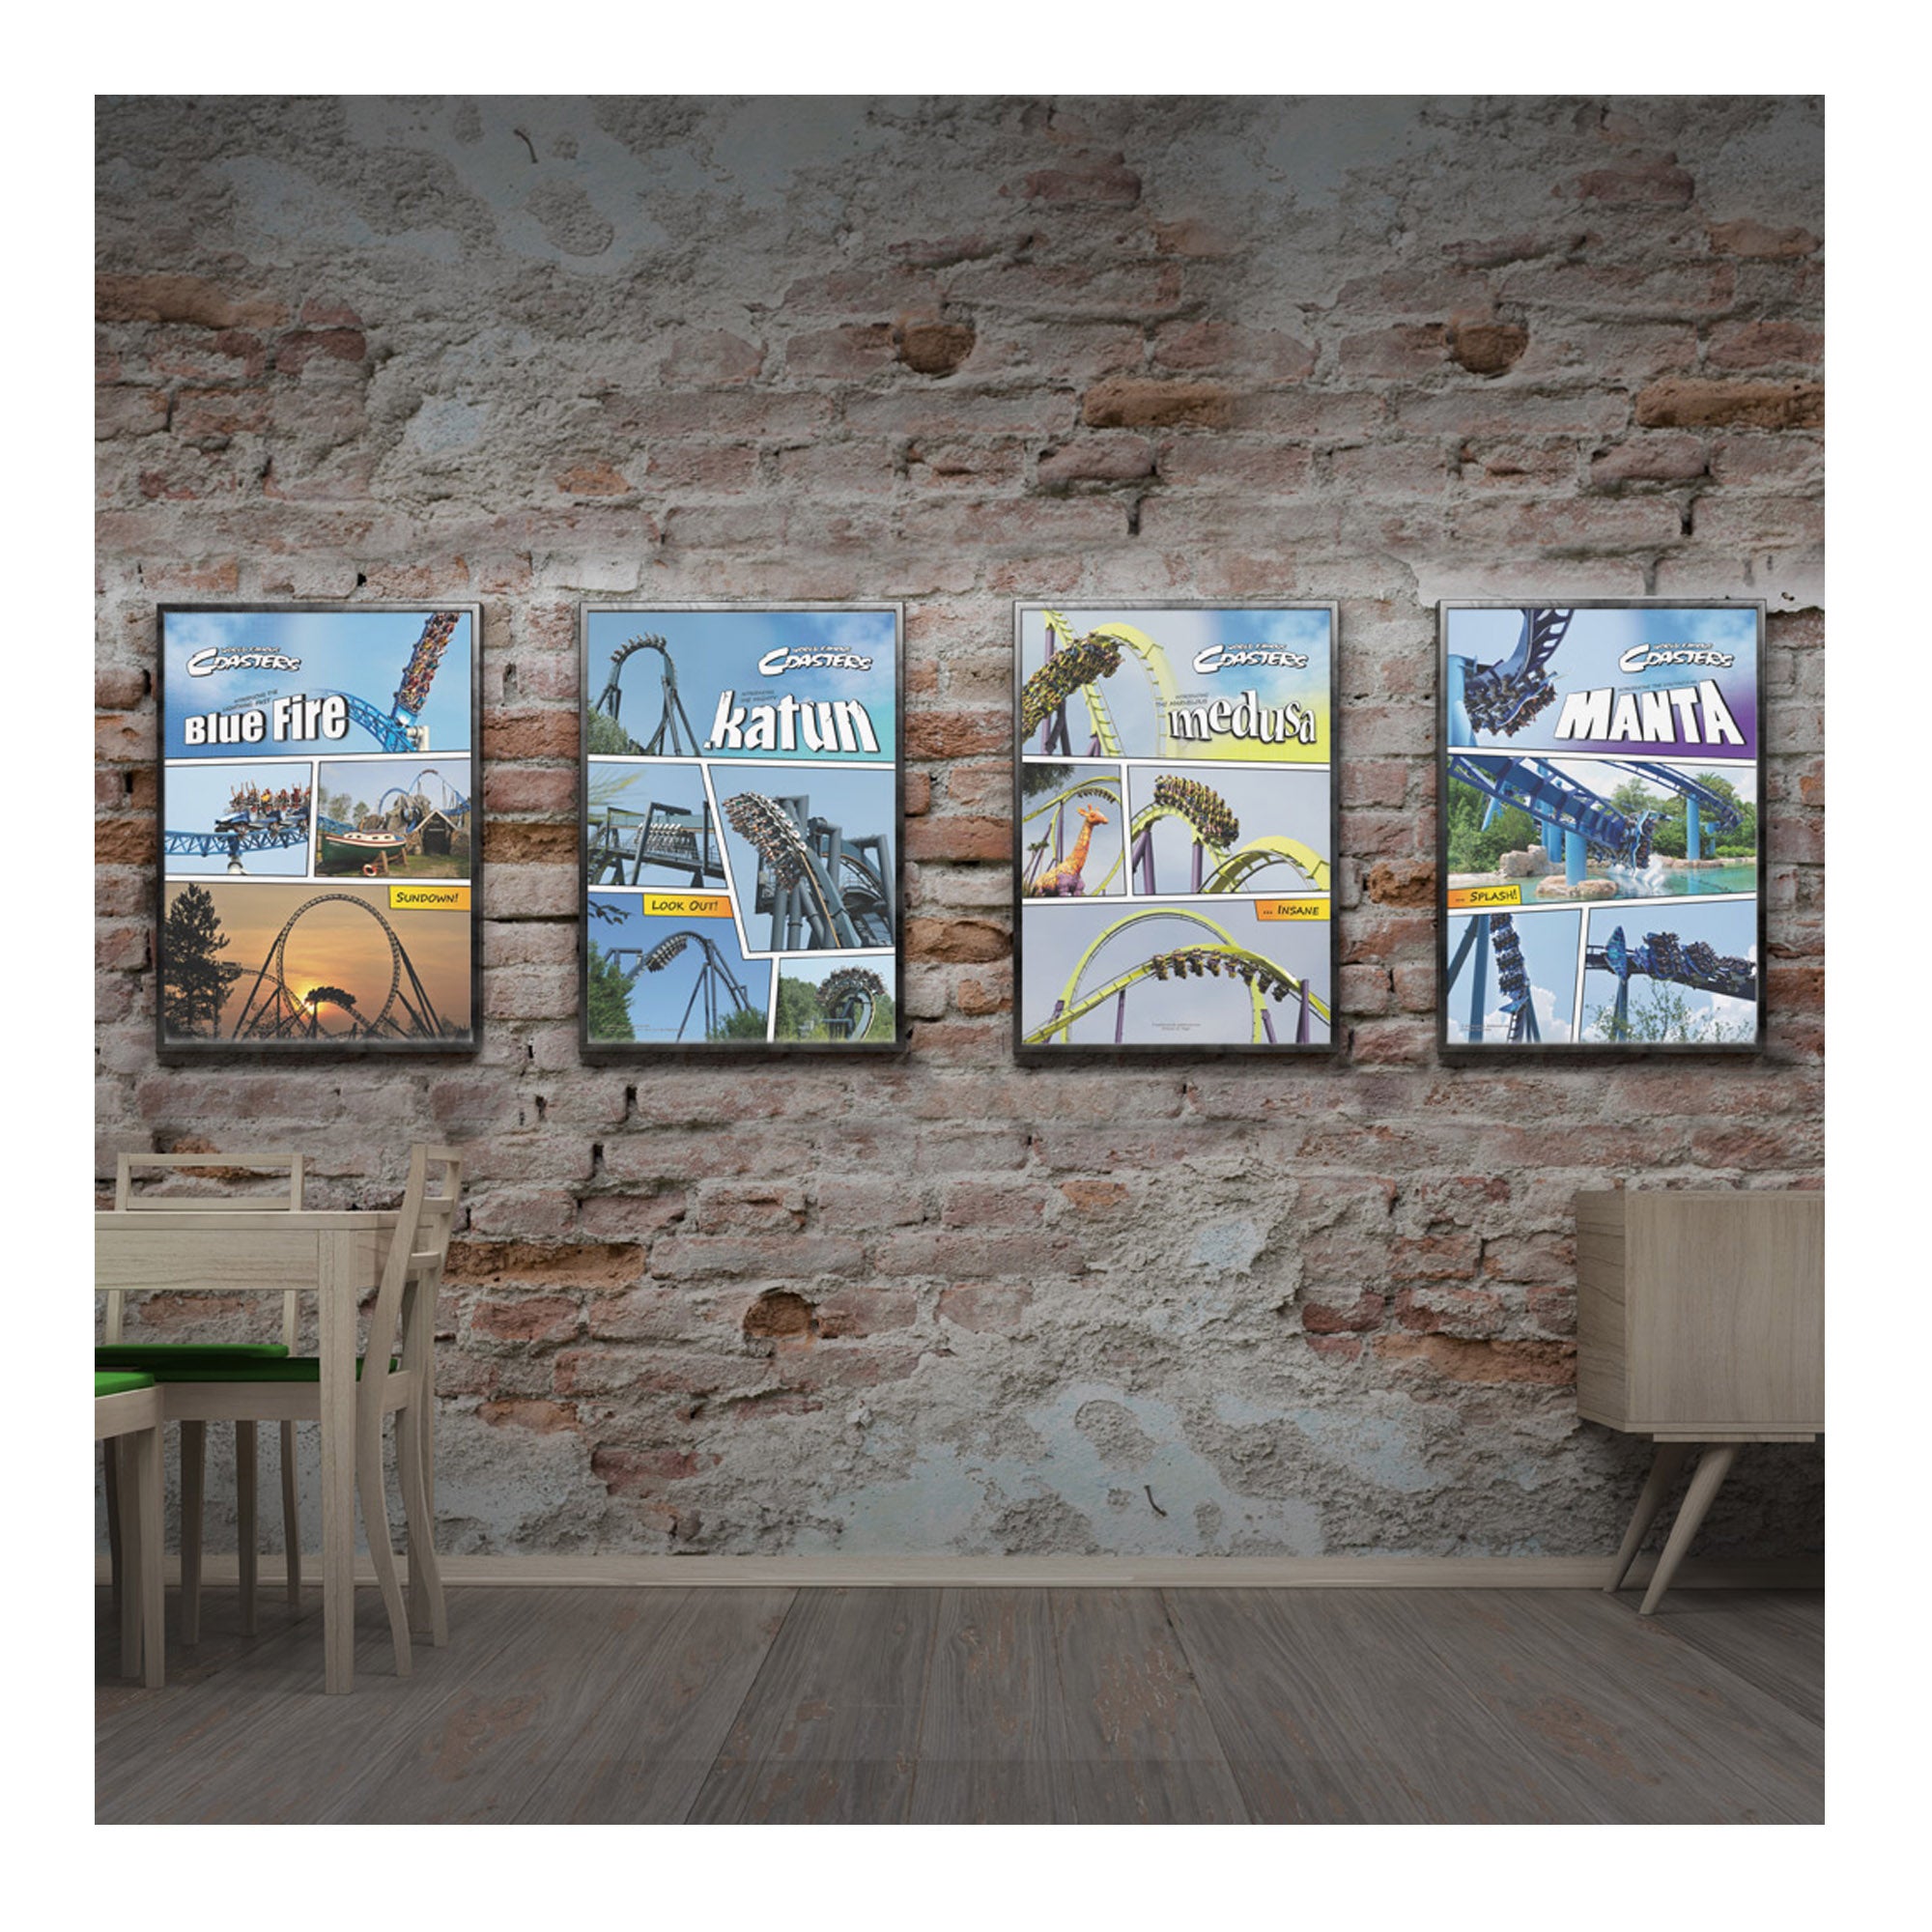 World Famous Coasters - Poster Package